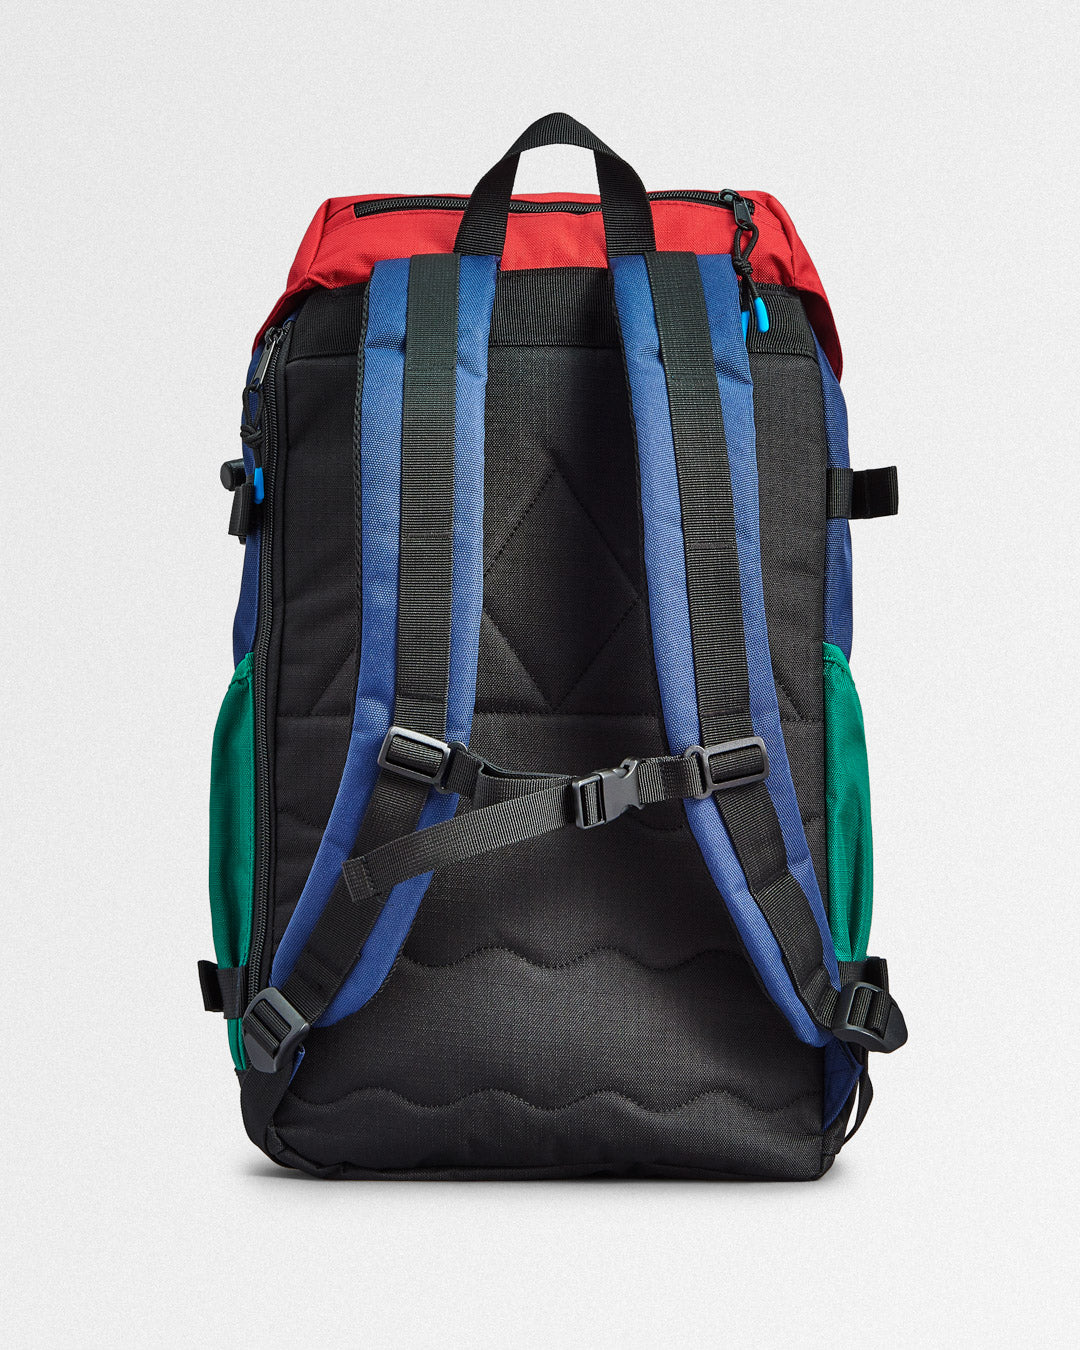 Boondocker Recycled 26L Backpack - Multi-Primary